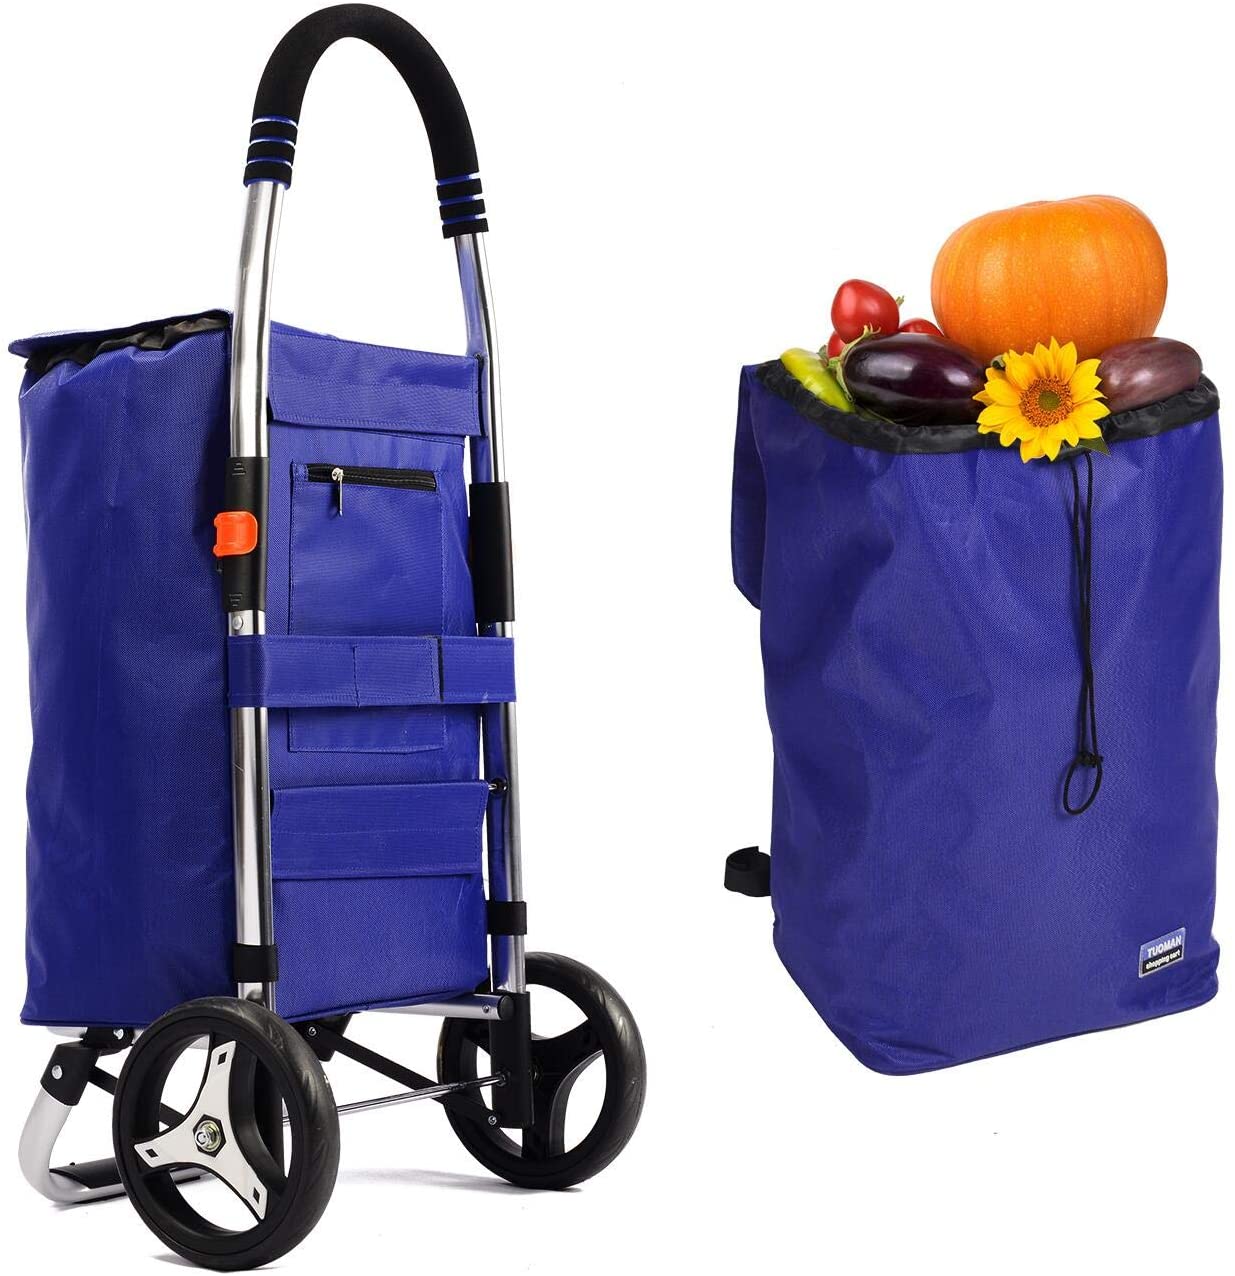 Shopping Trolley,  acbags.com Folding Shopping Carts Rolling acbags Cart with Wheels for Laundries, Cargo, Beach-Blue